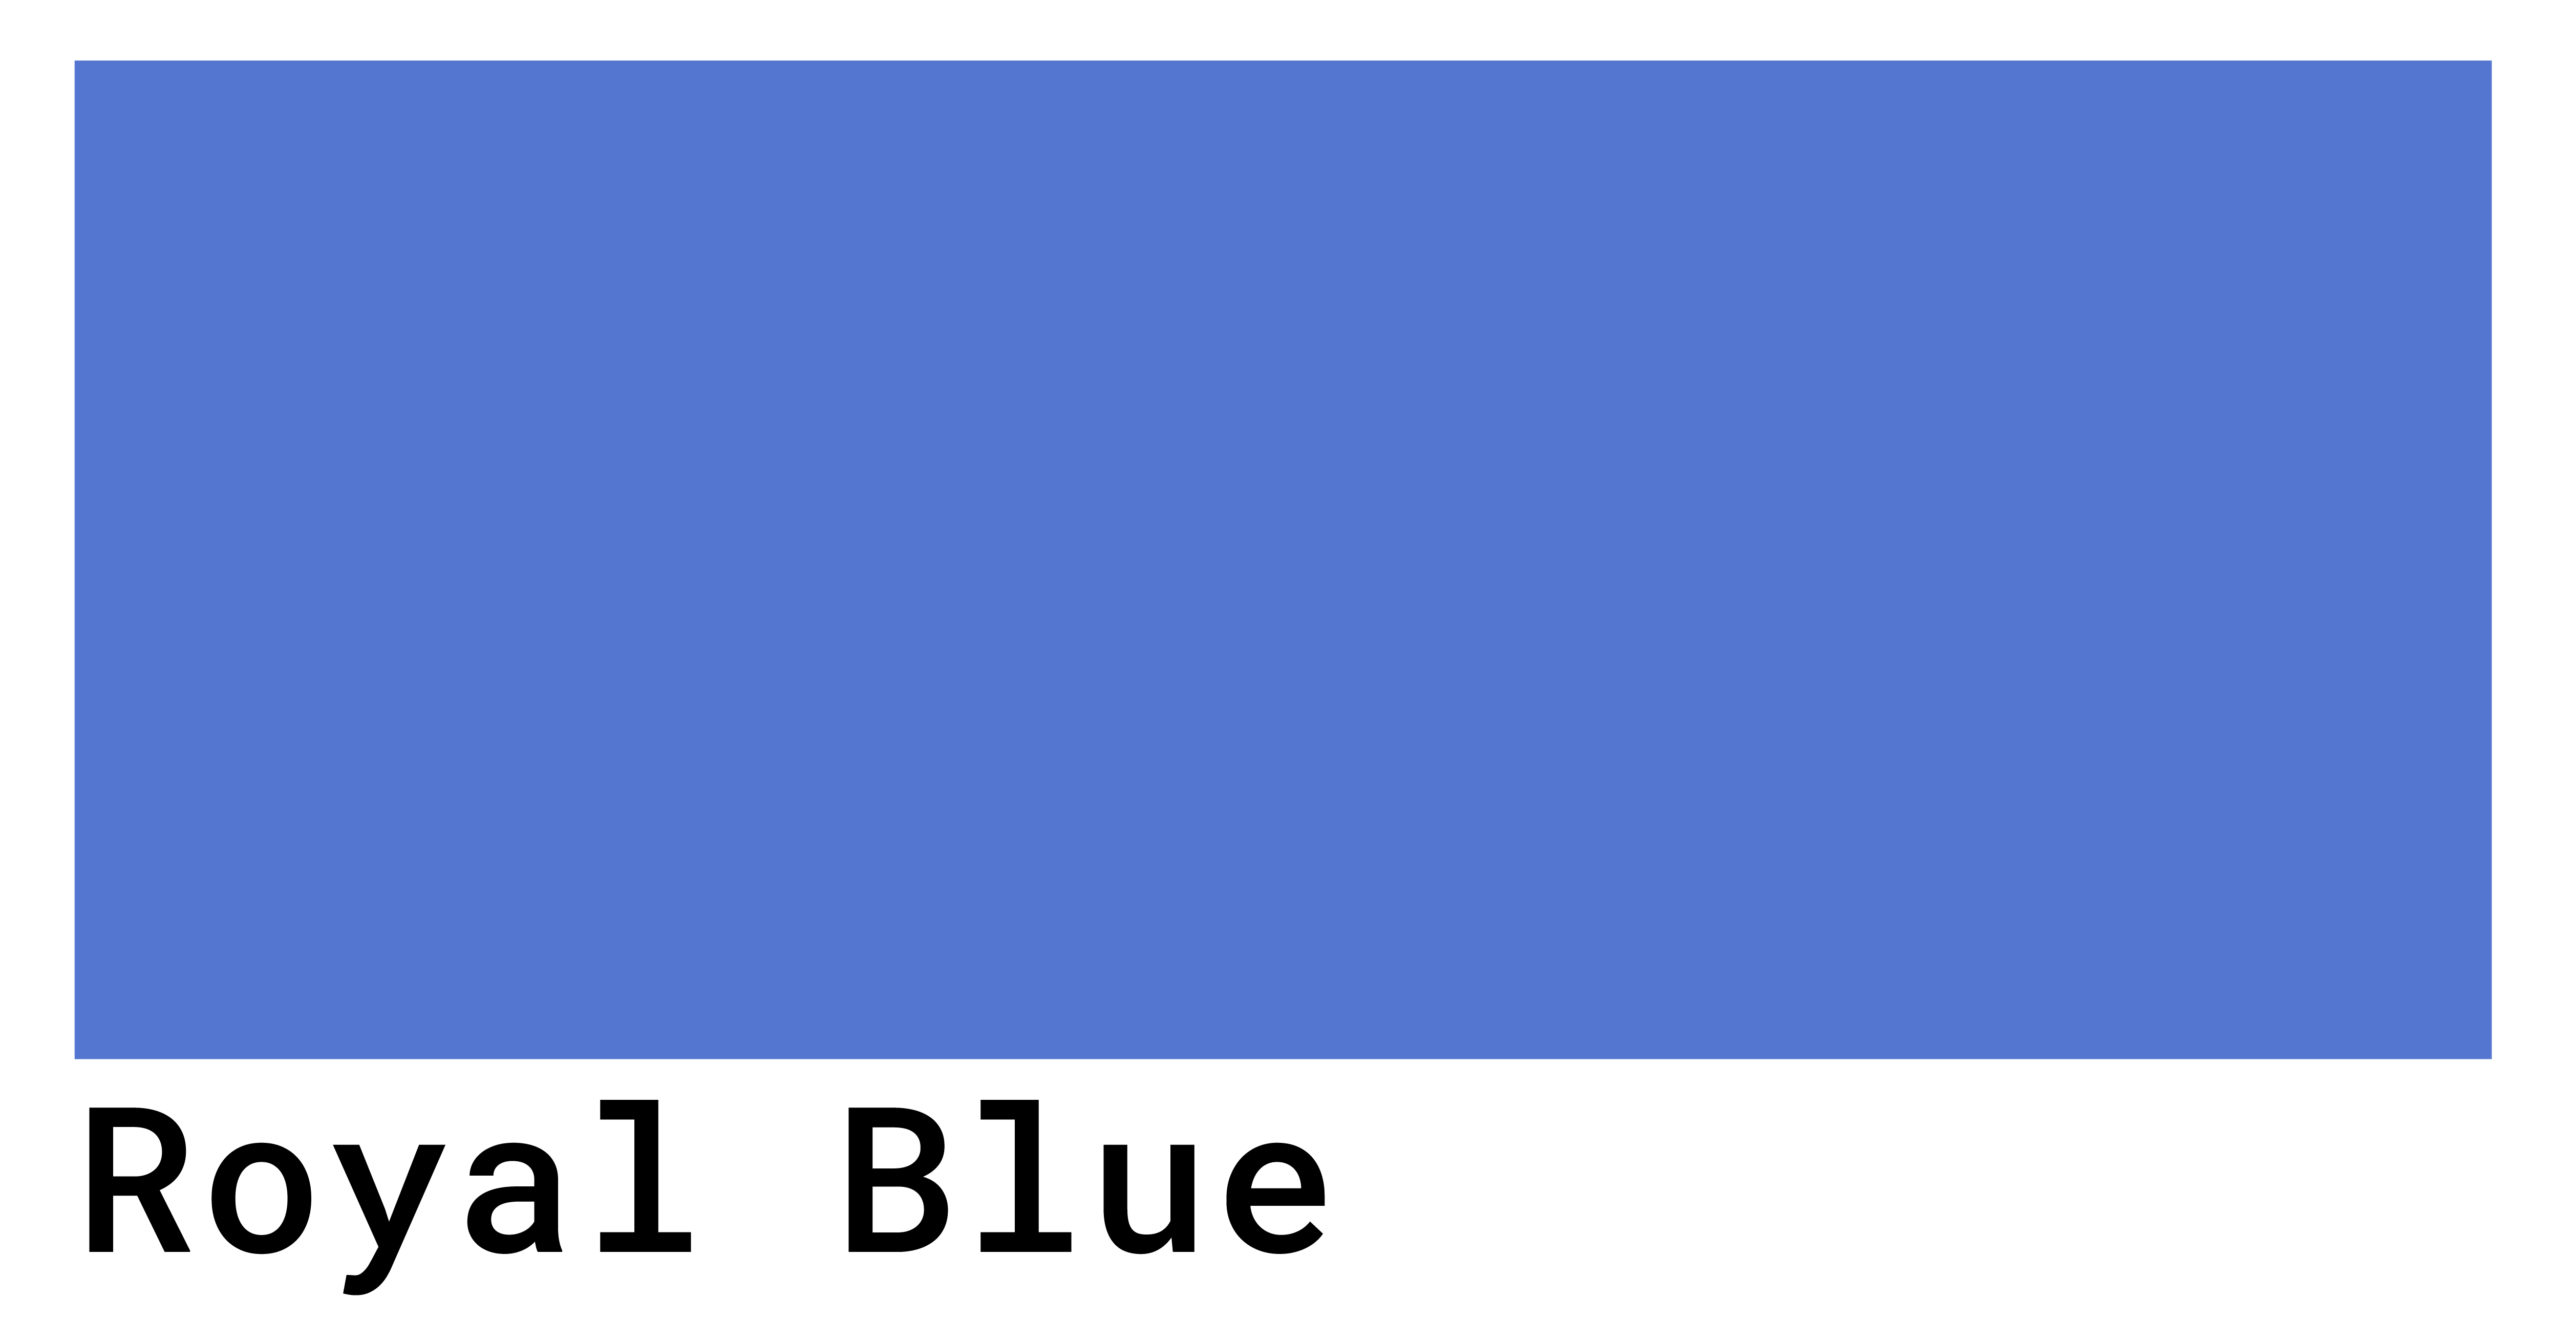 Royal Blue Color Codes - The Hex, RGB and CMYK Values That You Need